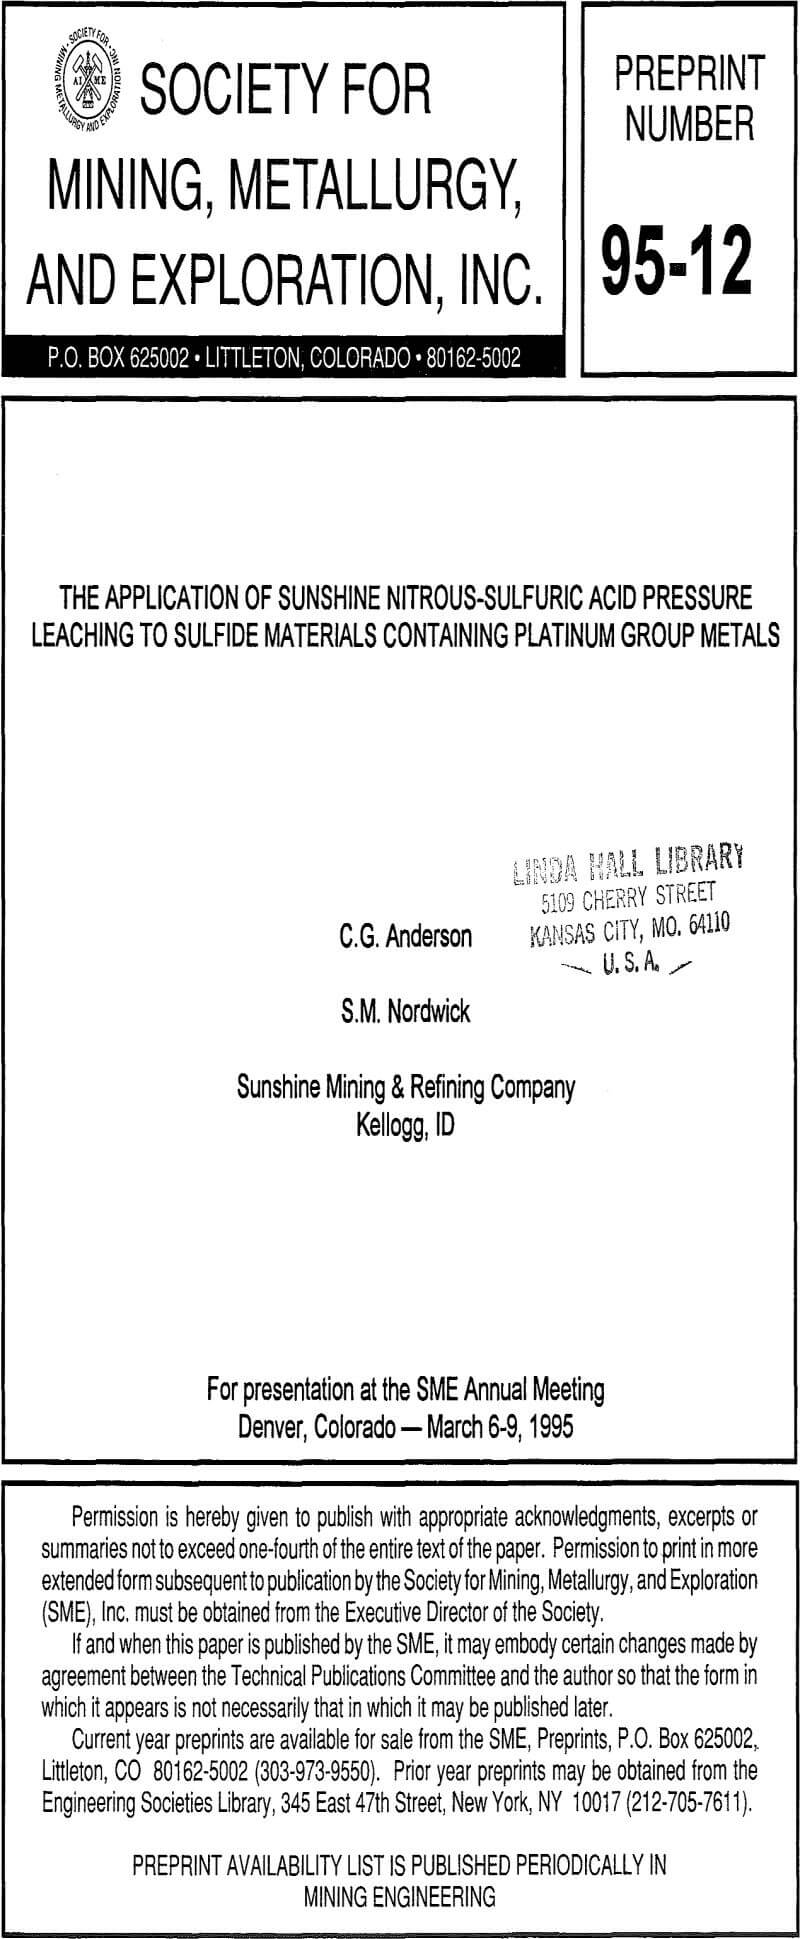 the application of sunshine nitrous-sulfuric acid pressure leaching to sulfide materials containing platinum group metals